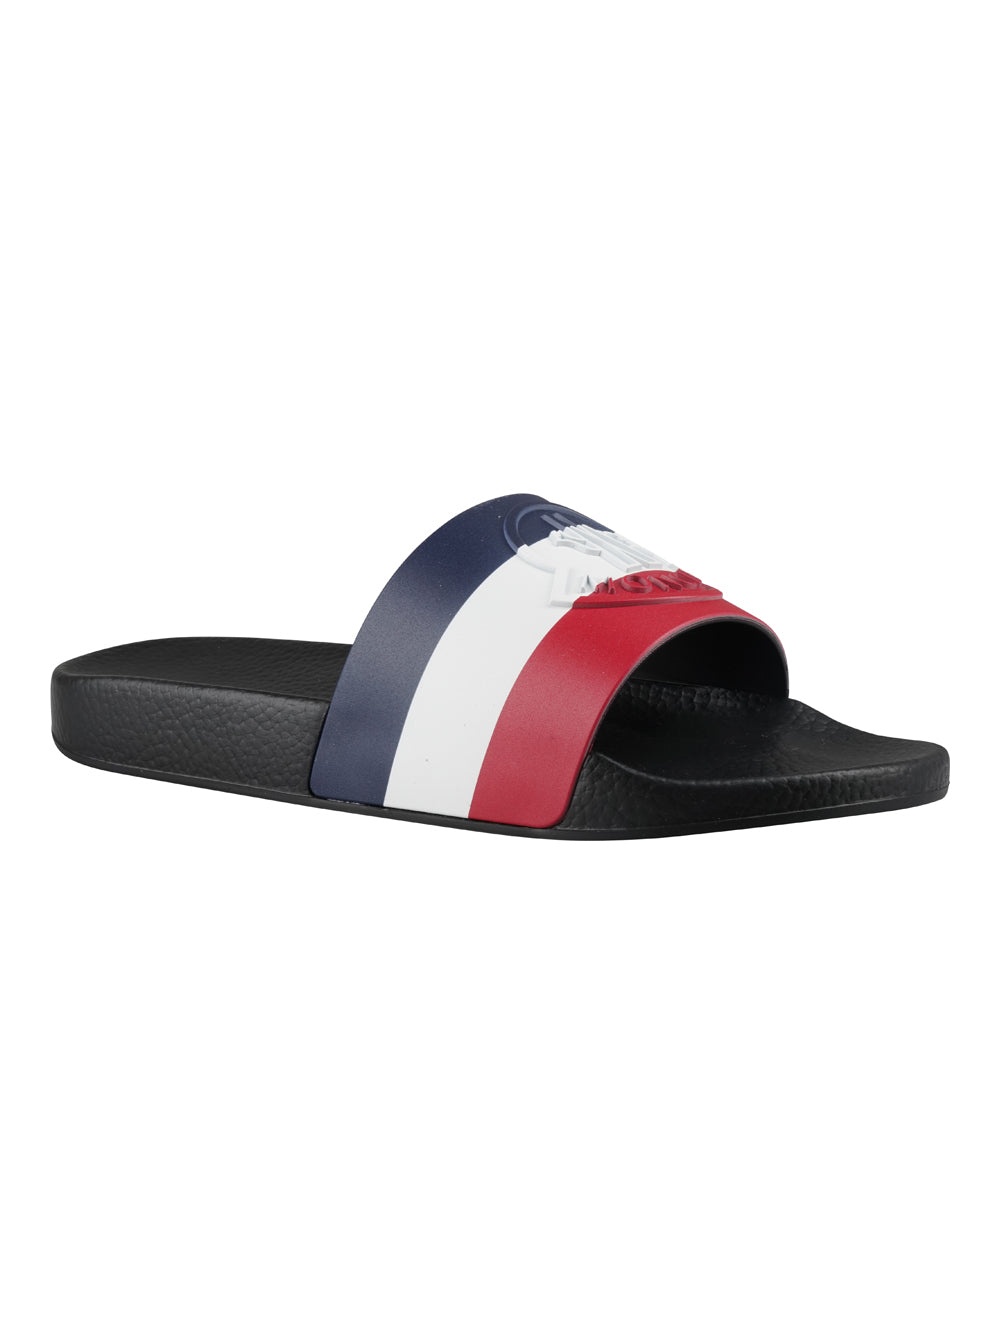 MONCLER MULTICOLOR SLIPPERS - 9